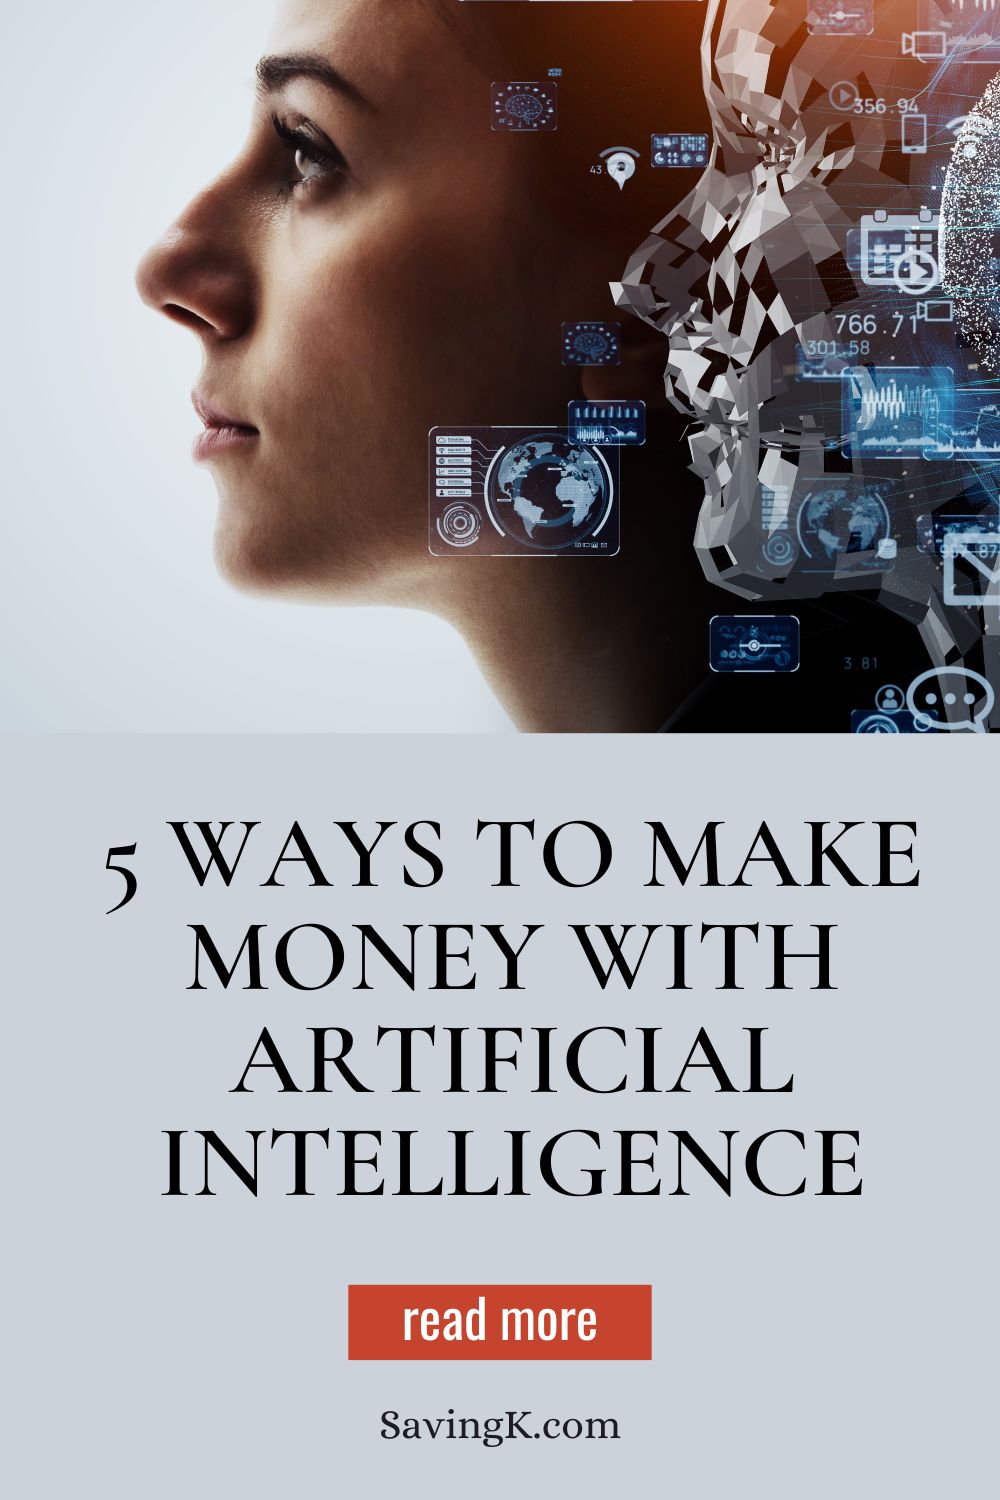 5 Ways To Make Money With Artificial Intelligence